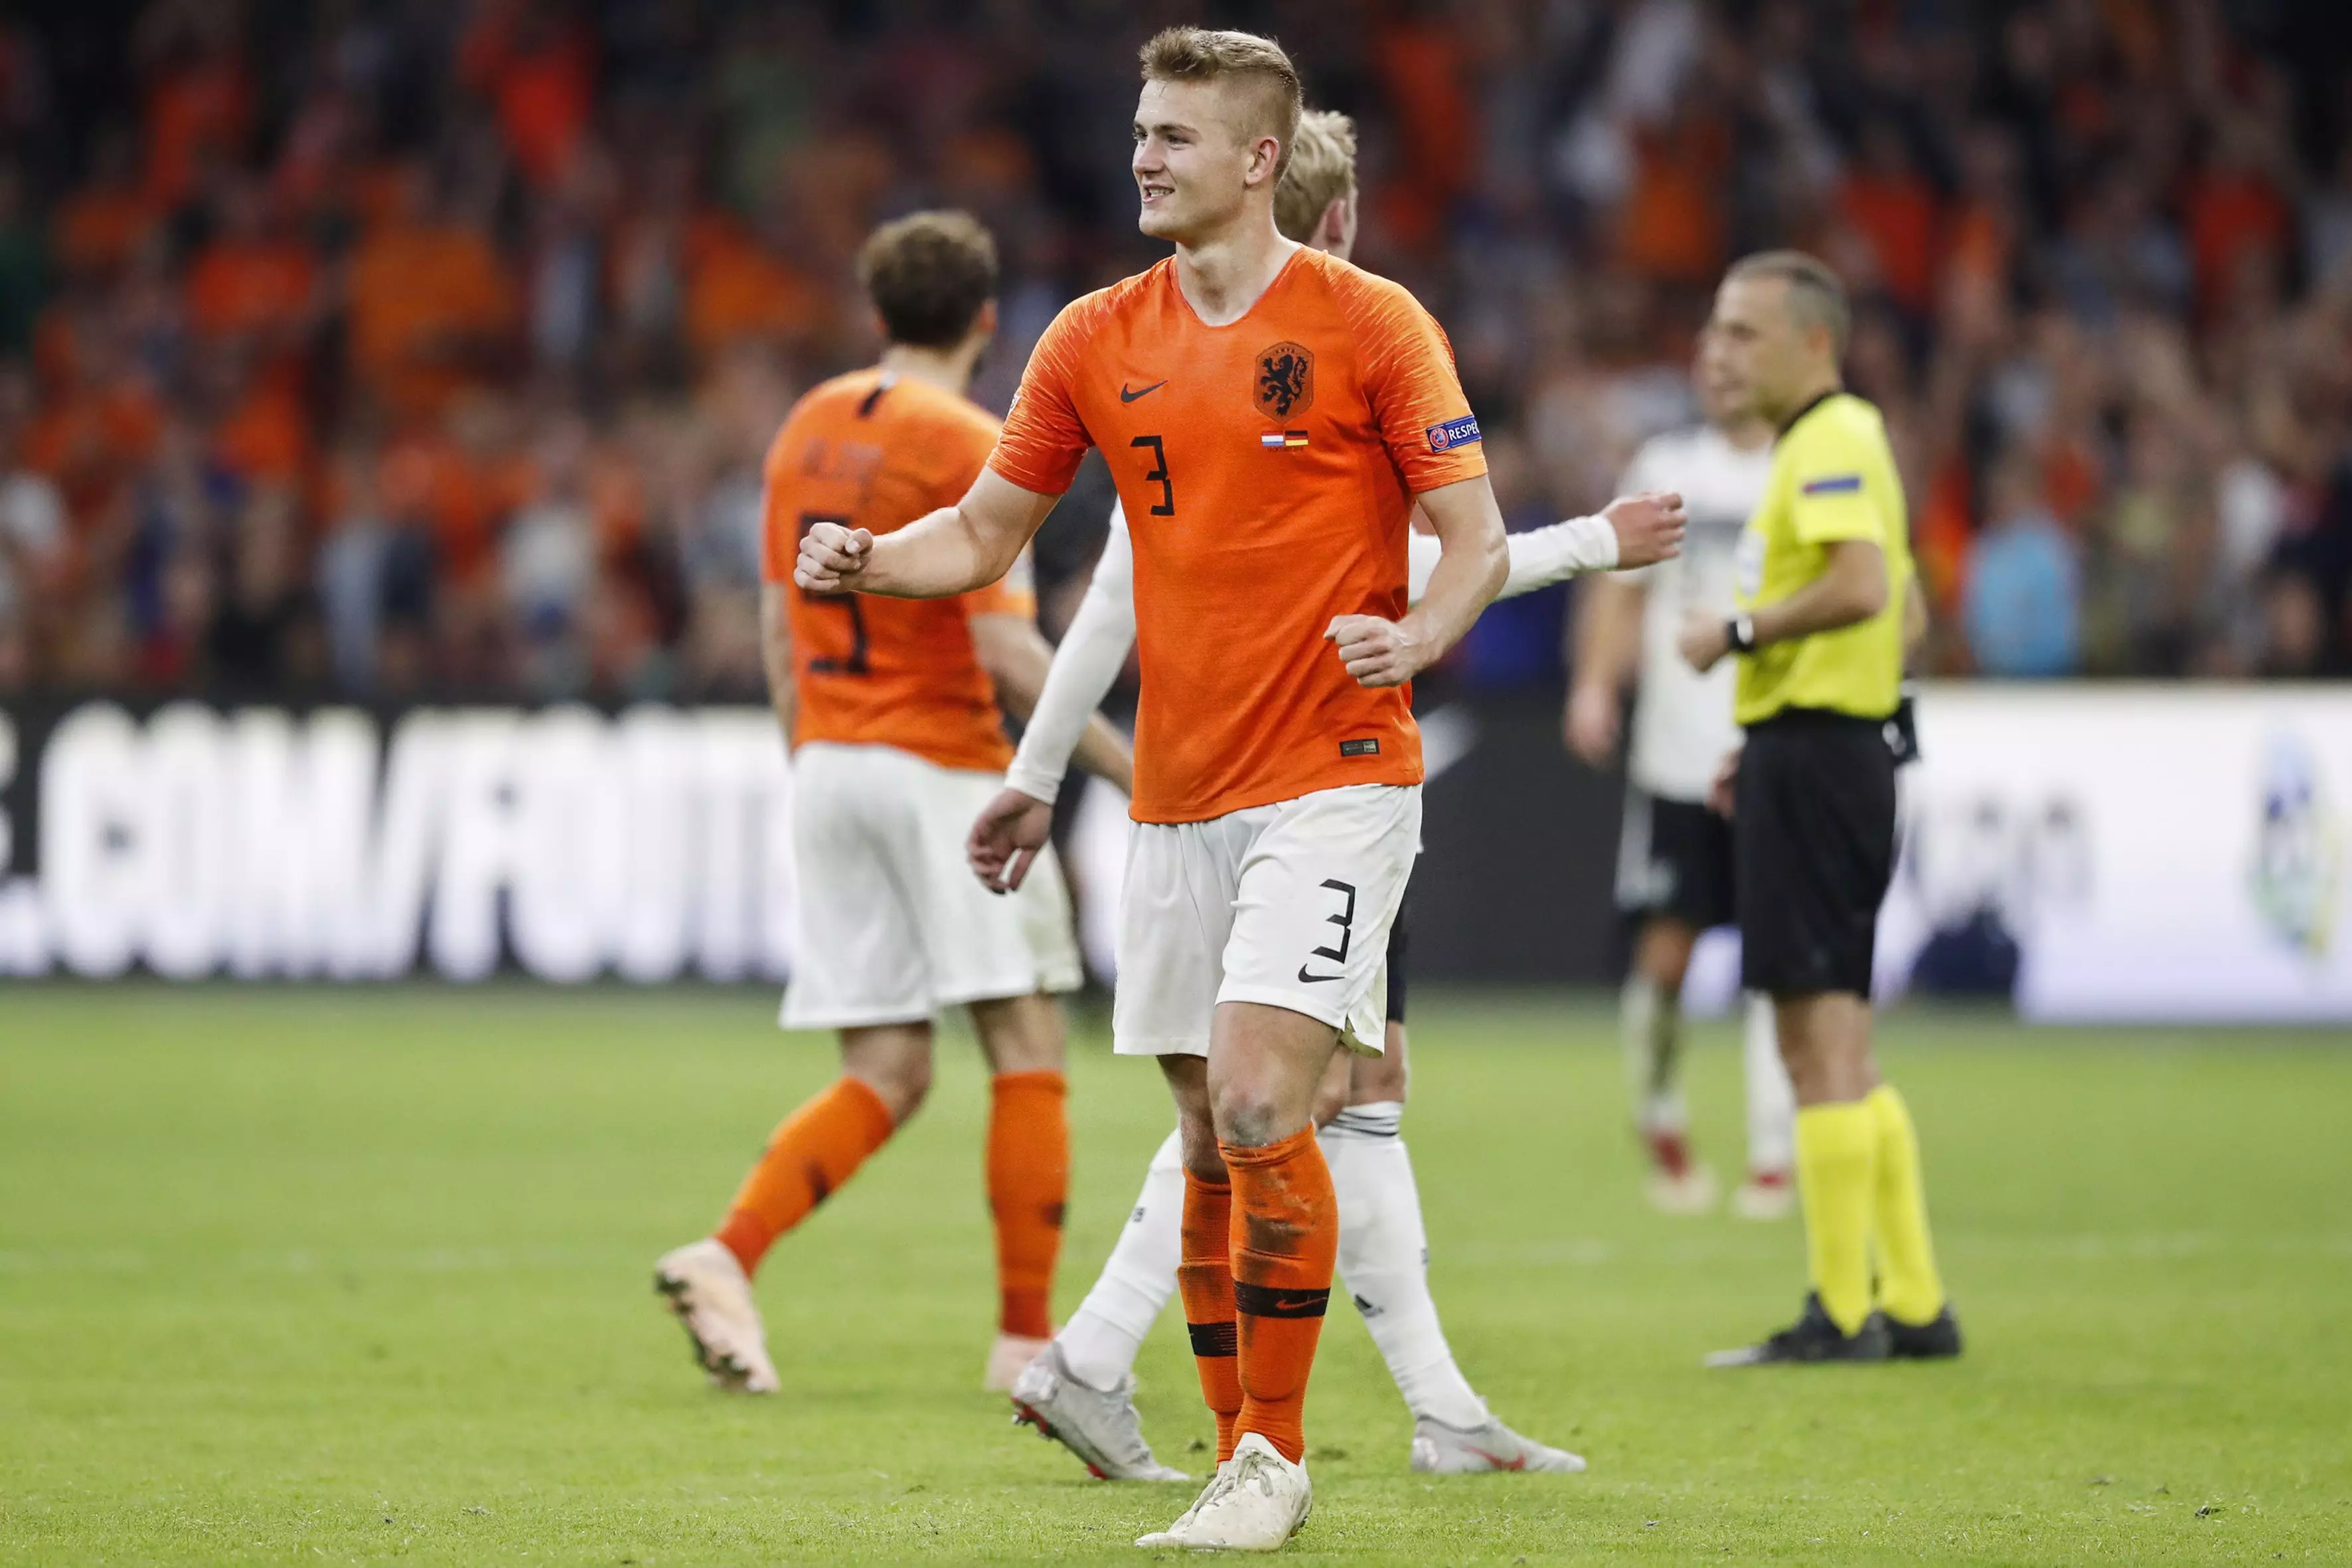 Di Ligt impressed for Netherlands against Germany in the Nations League. Image: PA Images